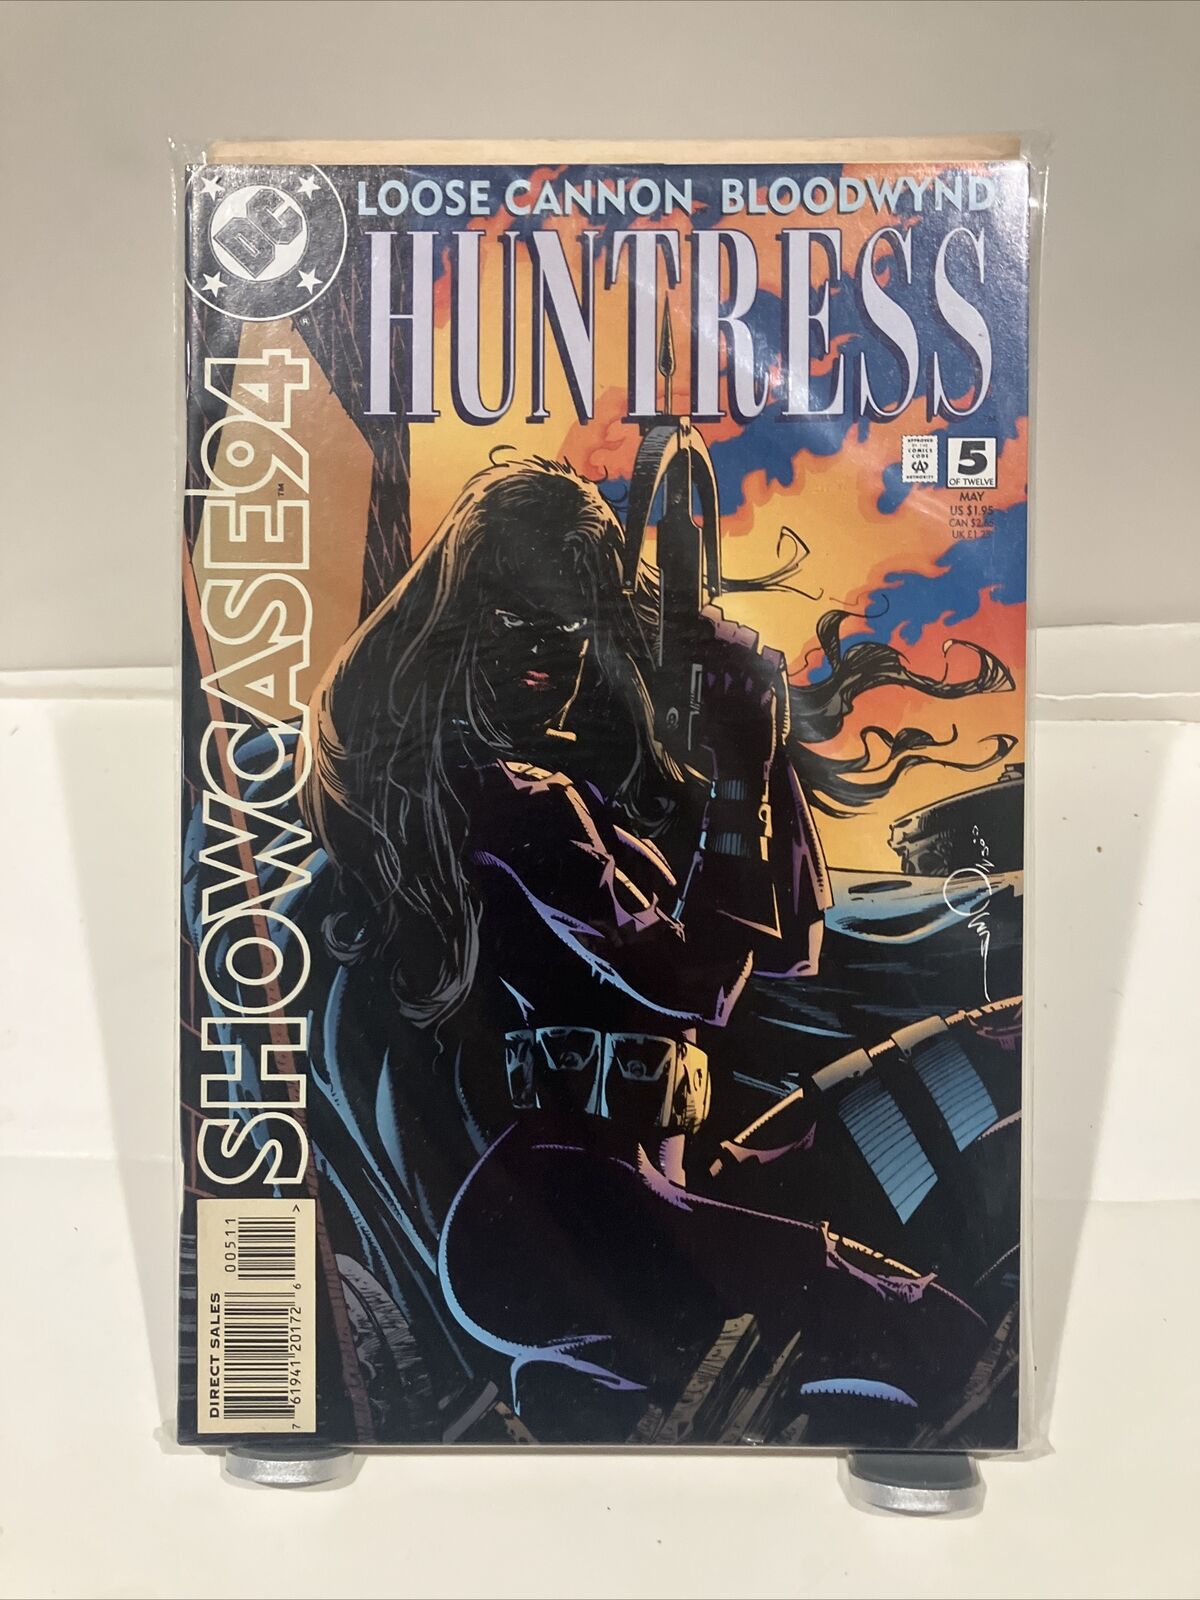 Showcase \'94 #5 (May 94) - Huntress, Loose Cannon, Bloodwynd